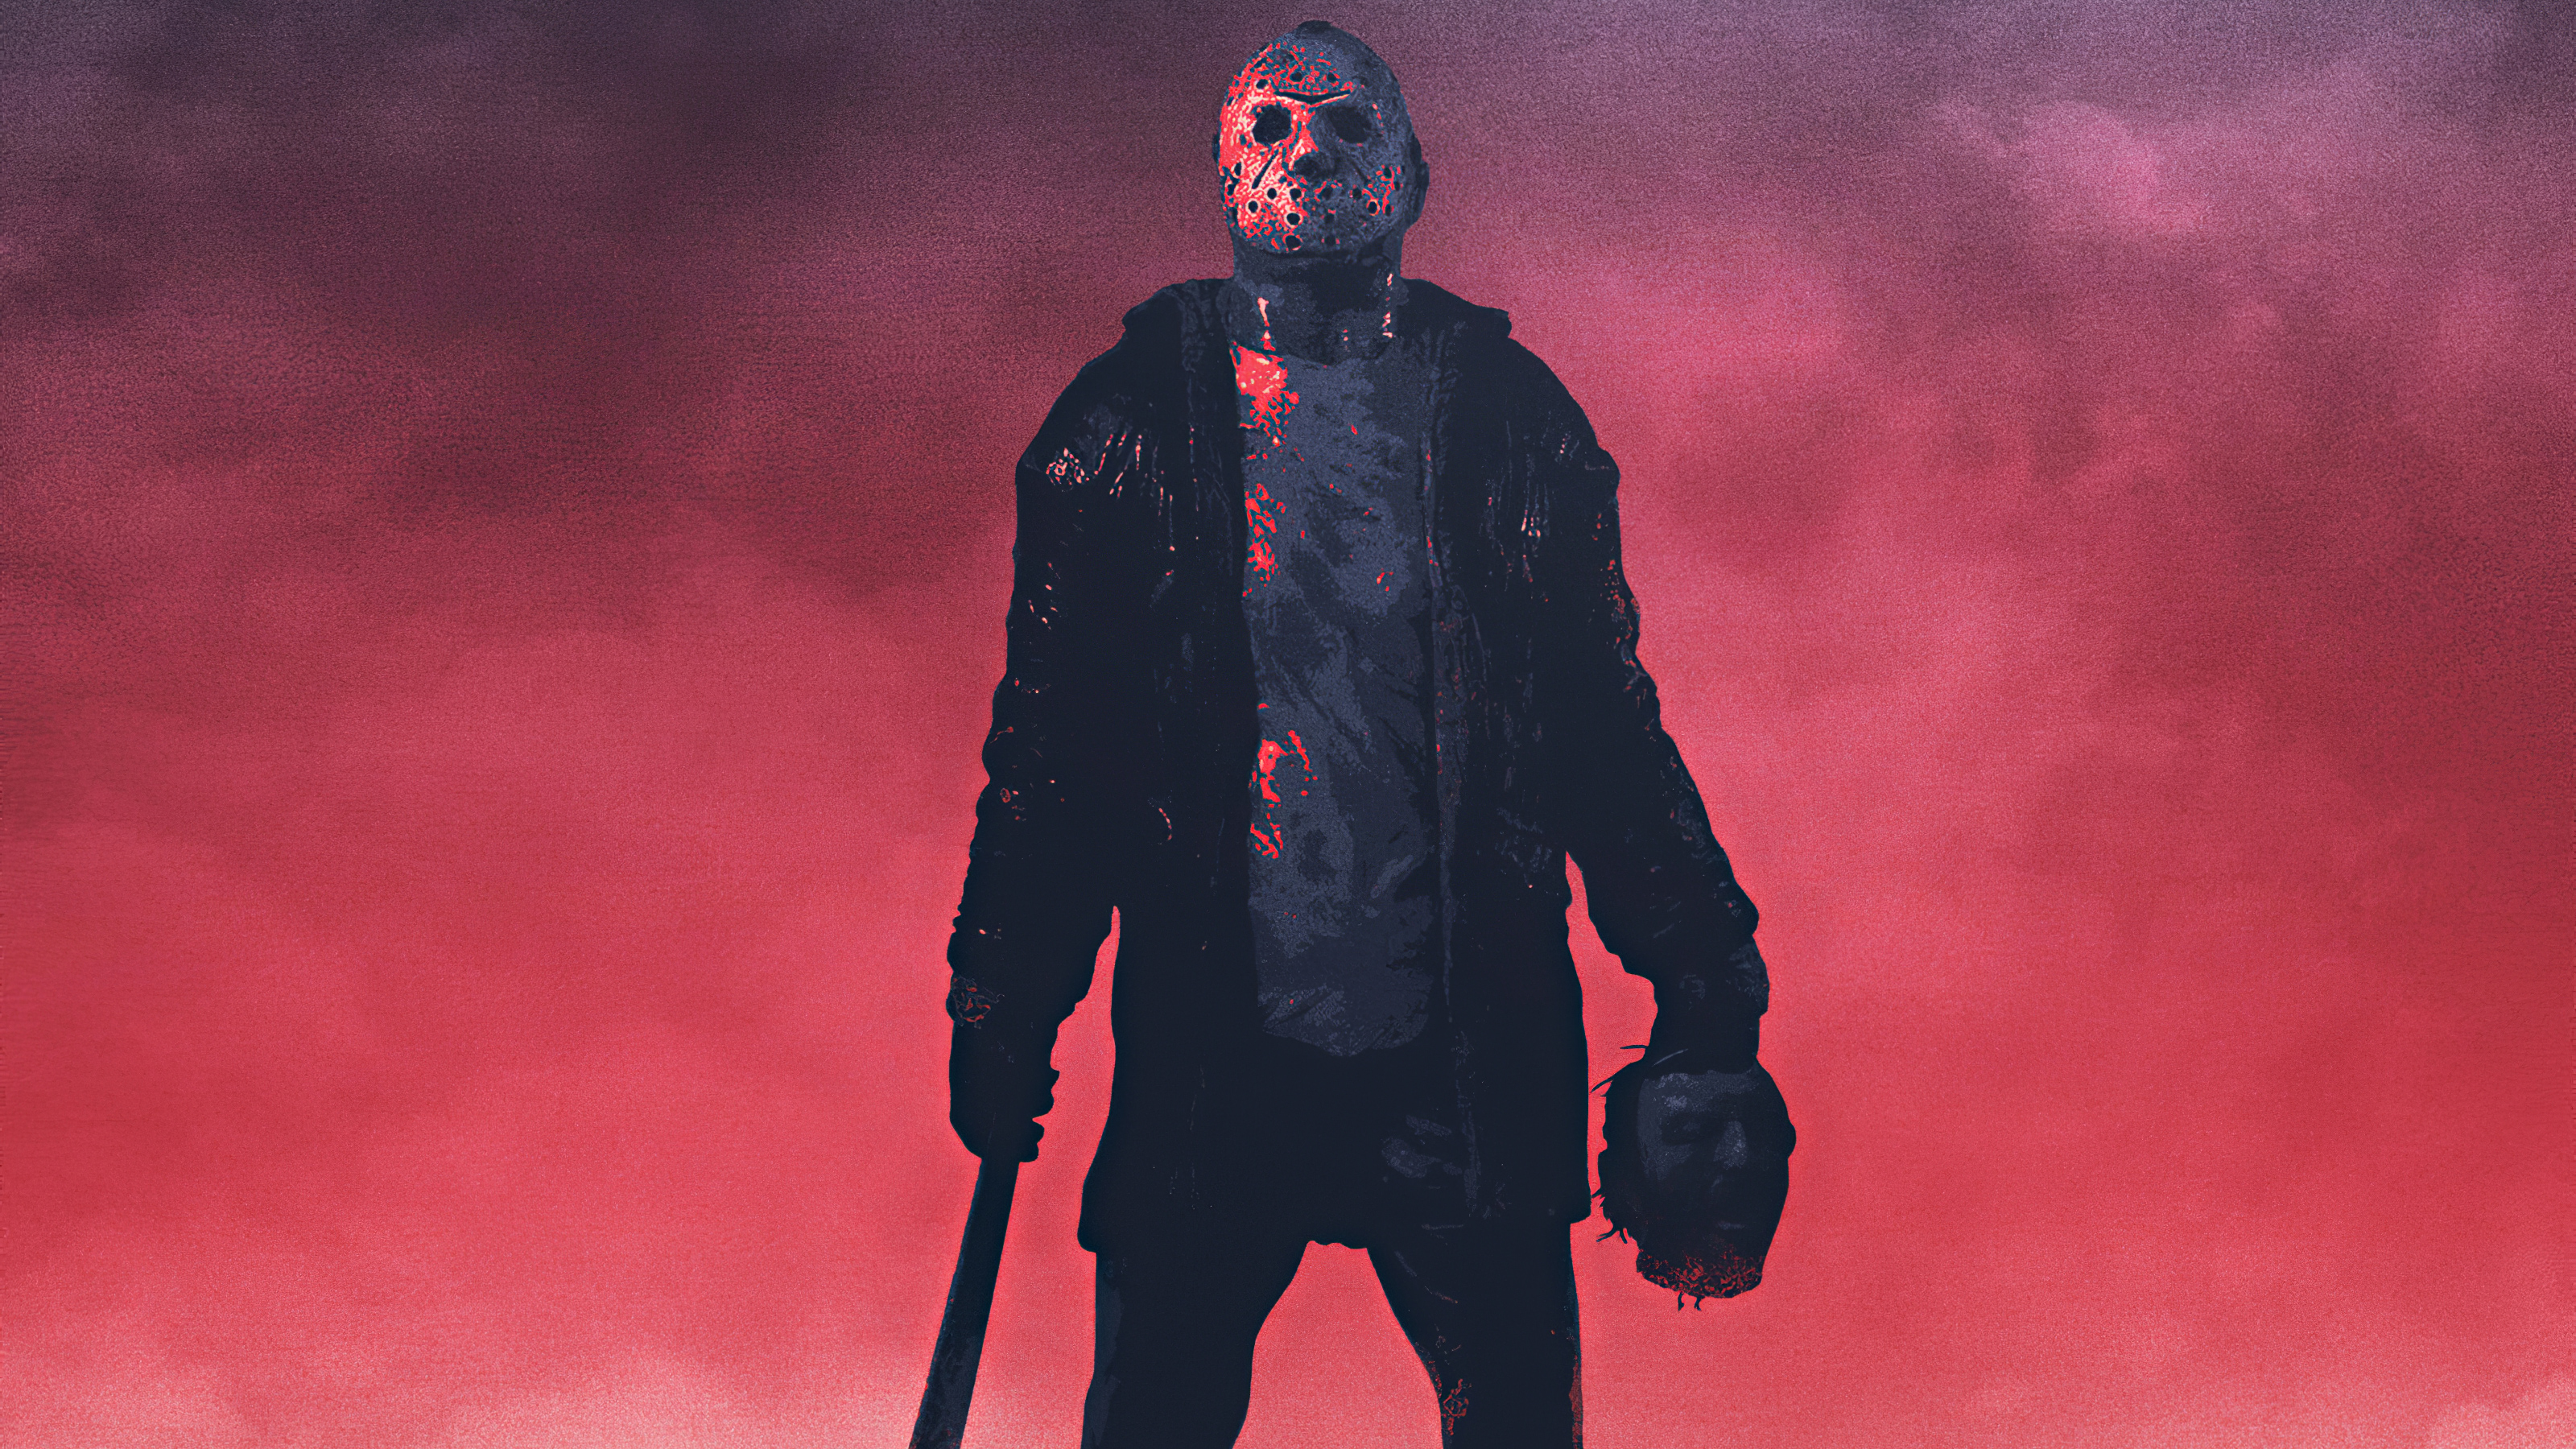 Friday The 13th The Games Game Art Mask Frontal View Horror Horror Movies 3200x1800